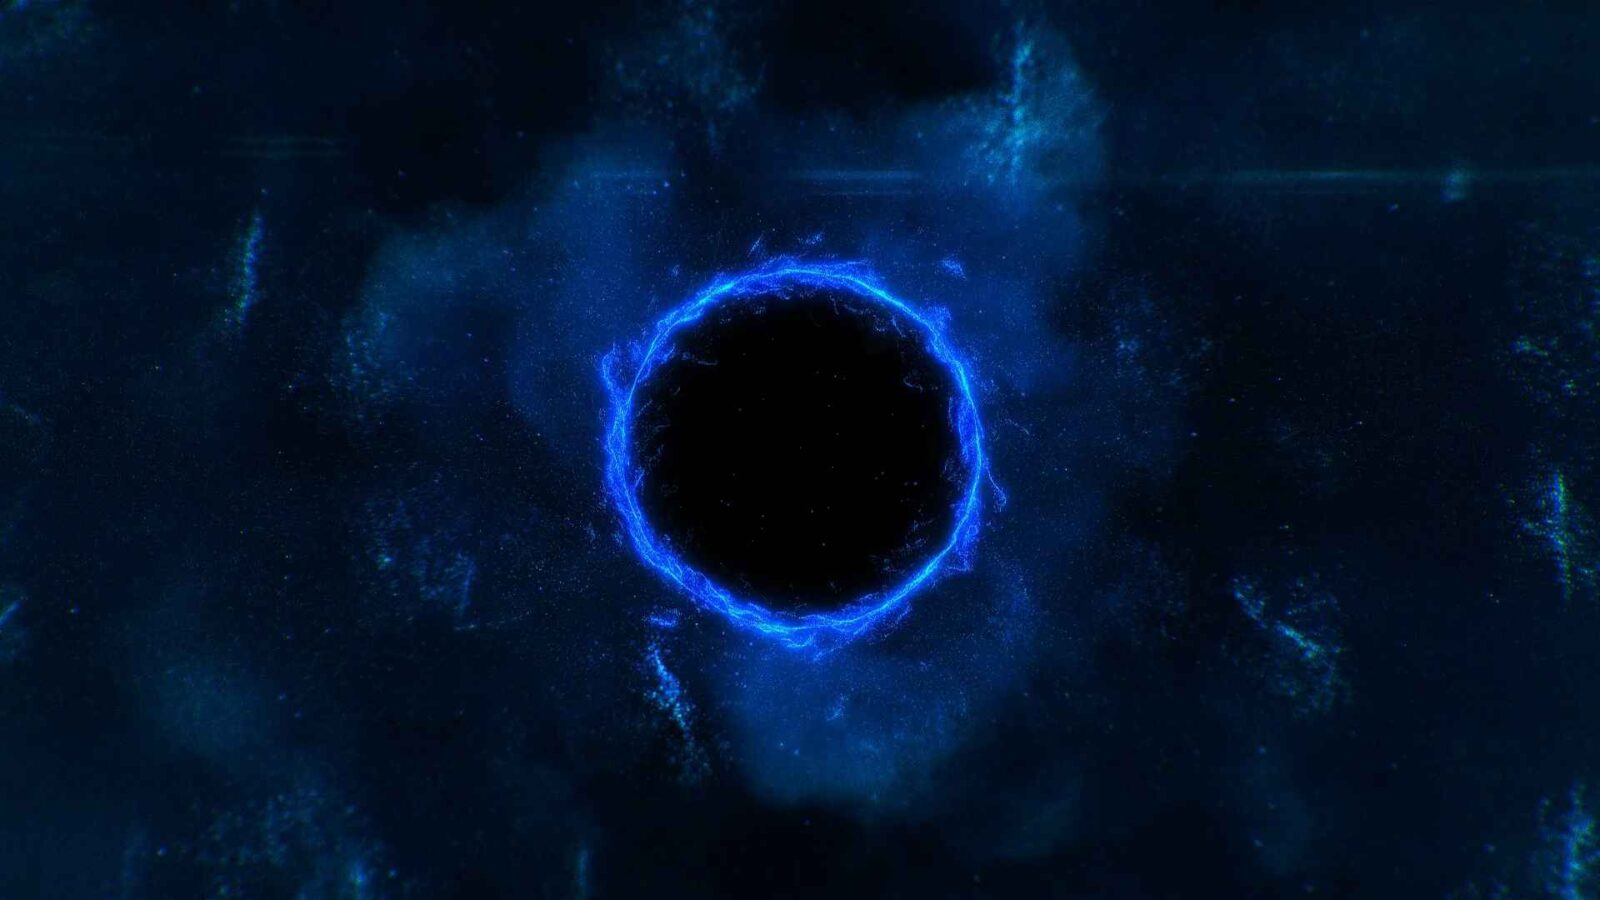 Live Desktop Wallpapers | Animated Black Hole Space - Free Live Wallpaper